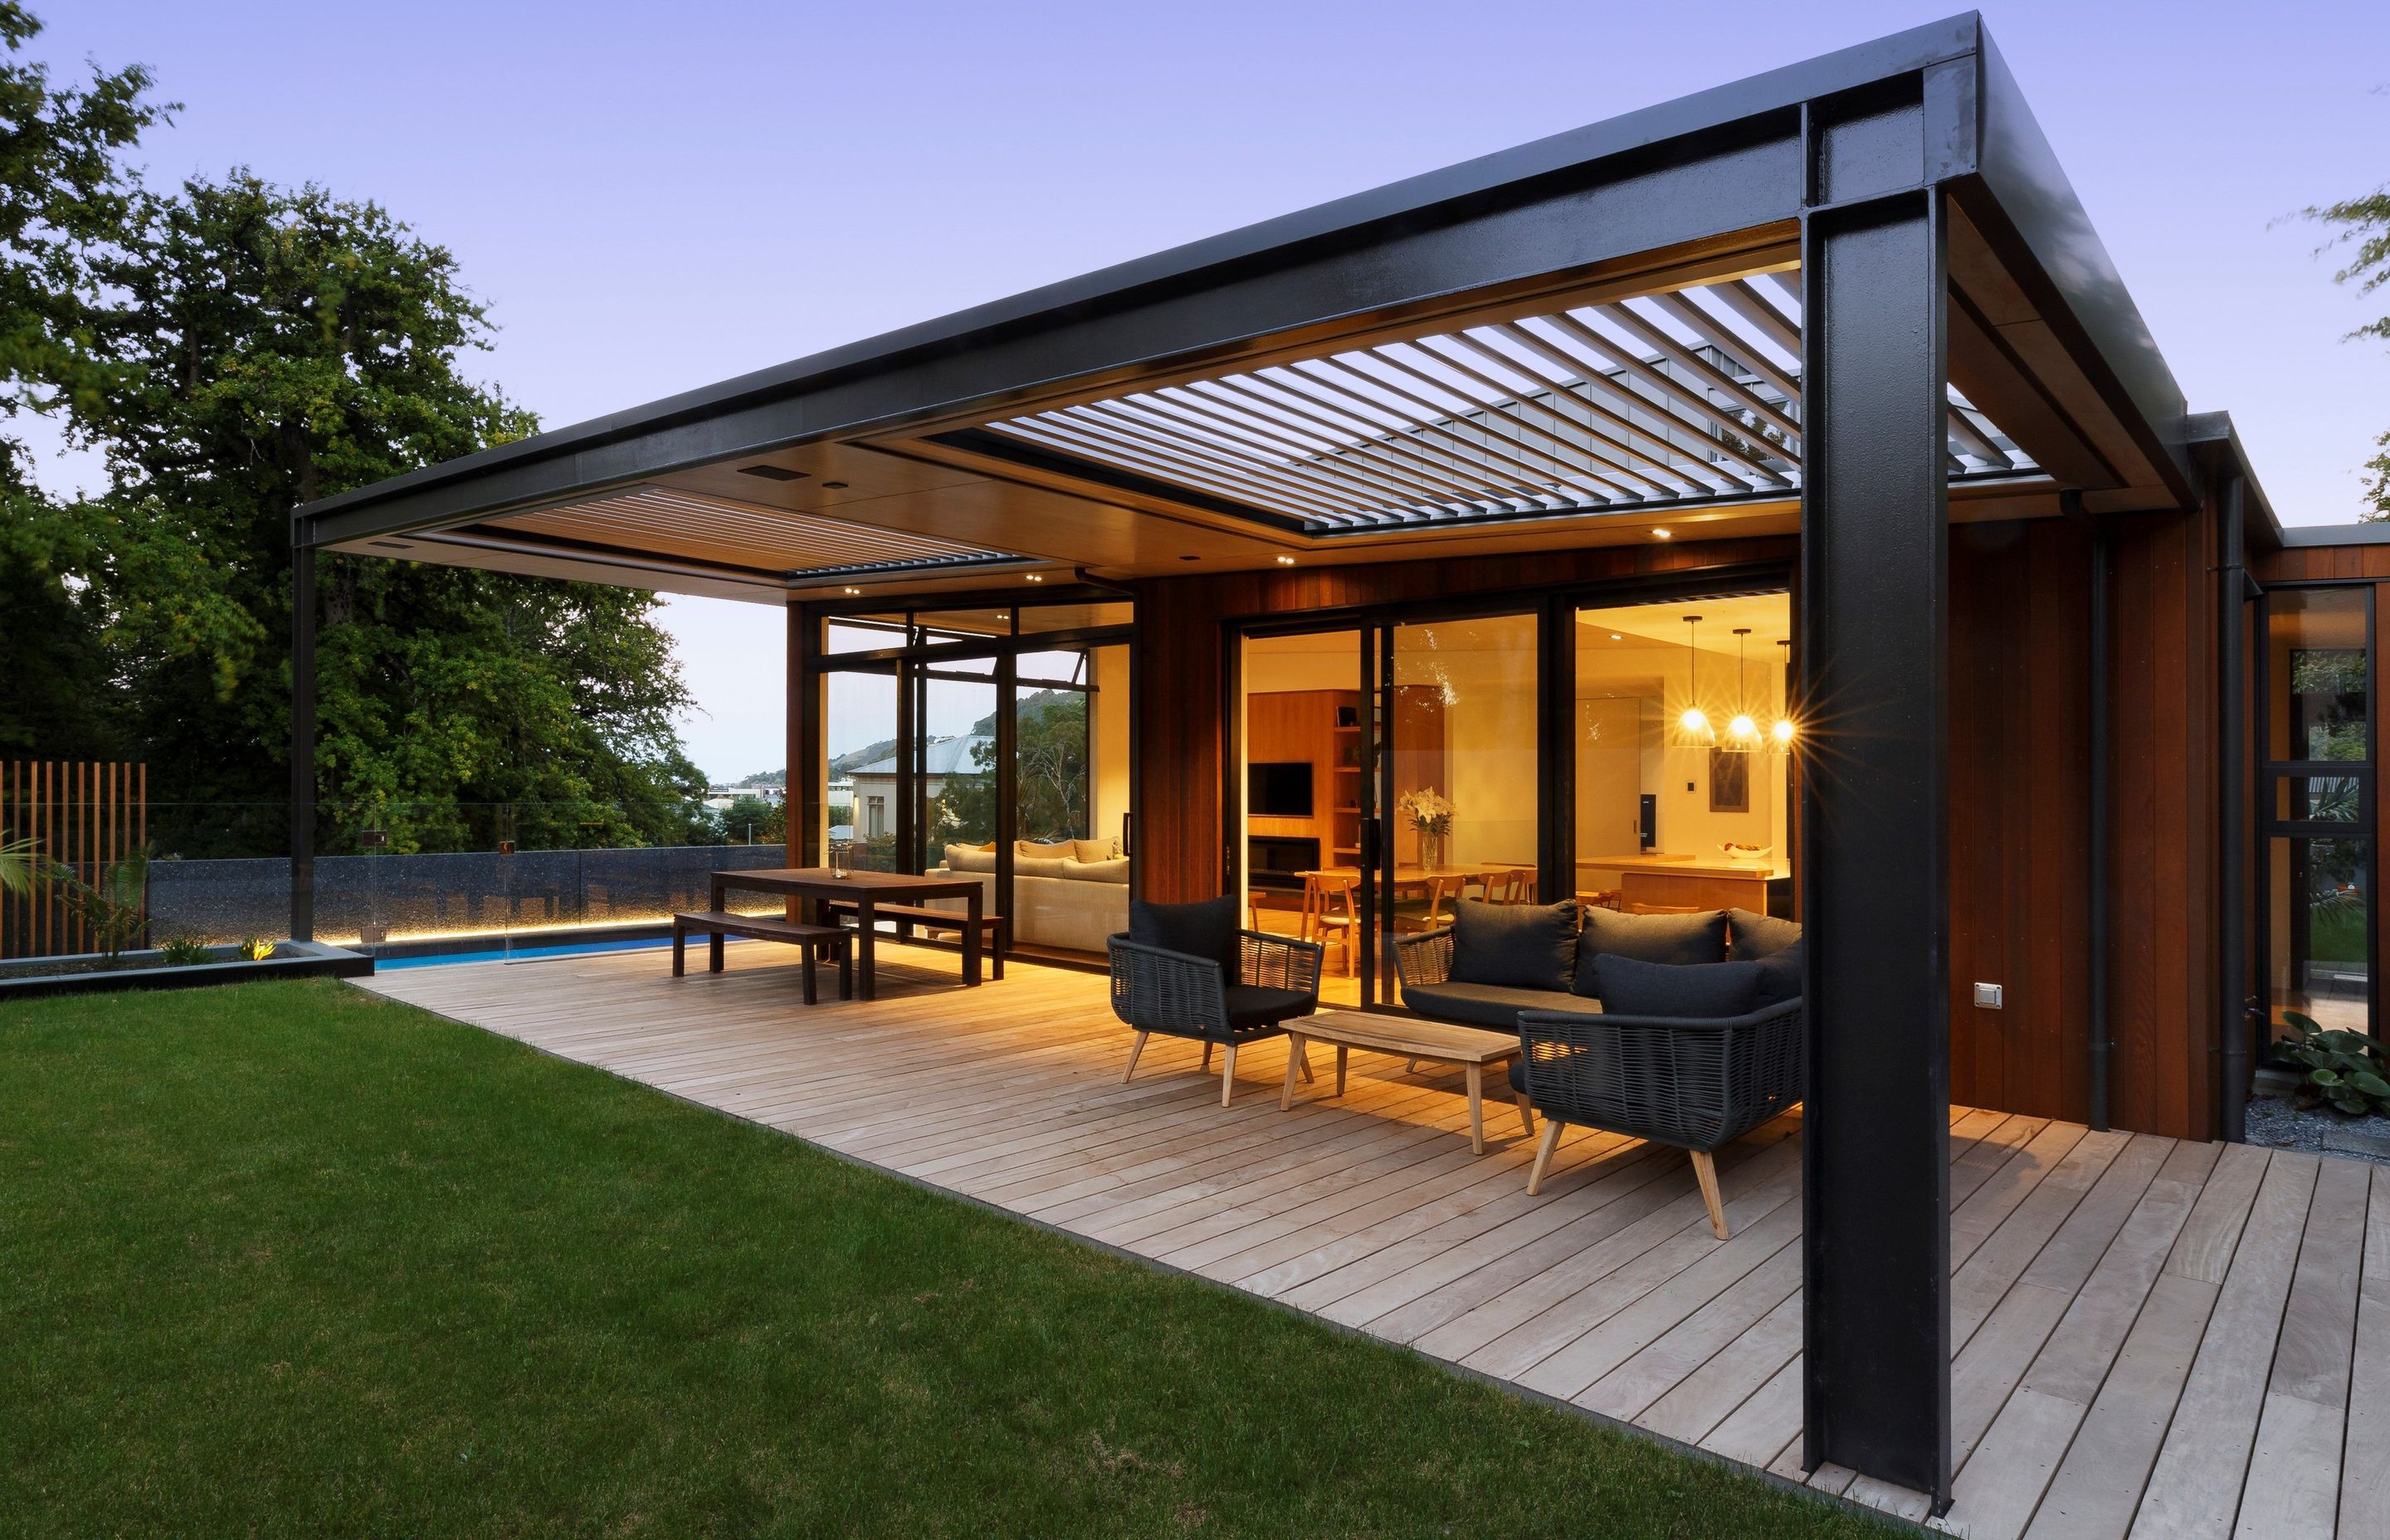 The west facing patio captures evening sun, and is sheltered with an operable louvred roof.